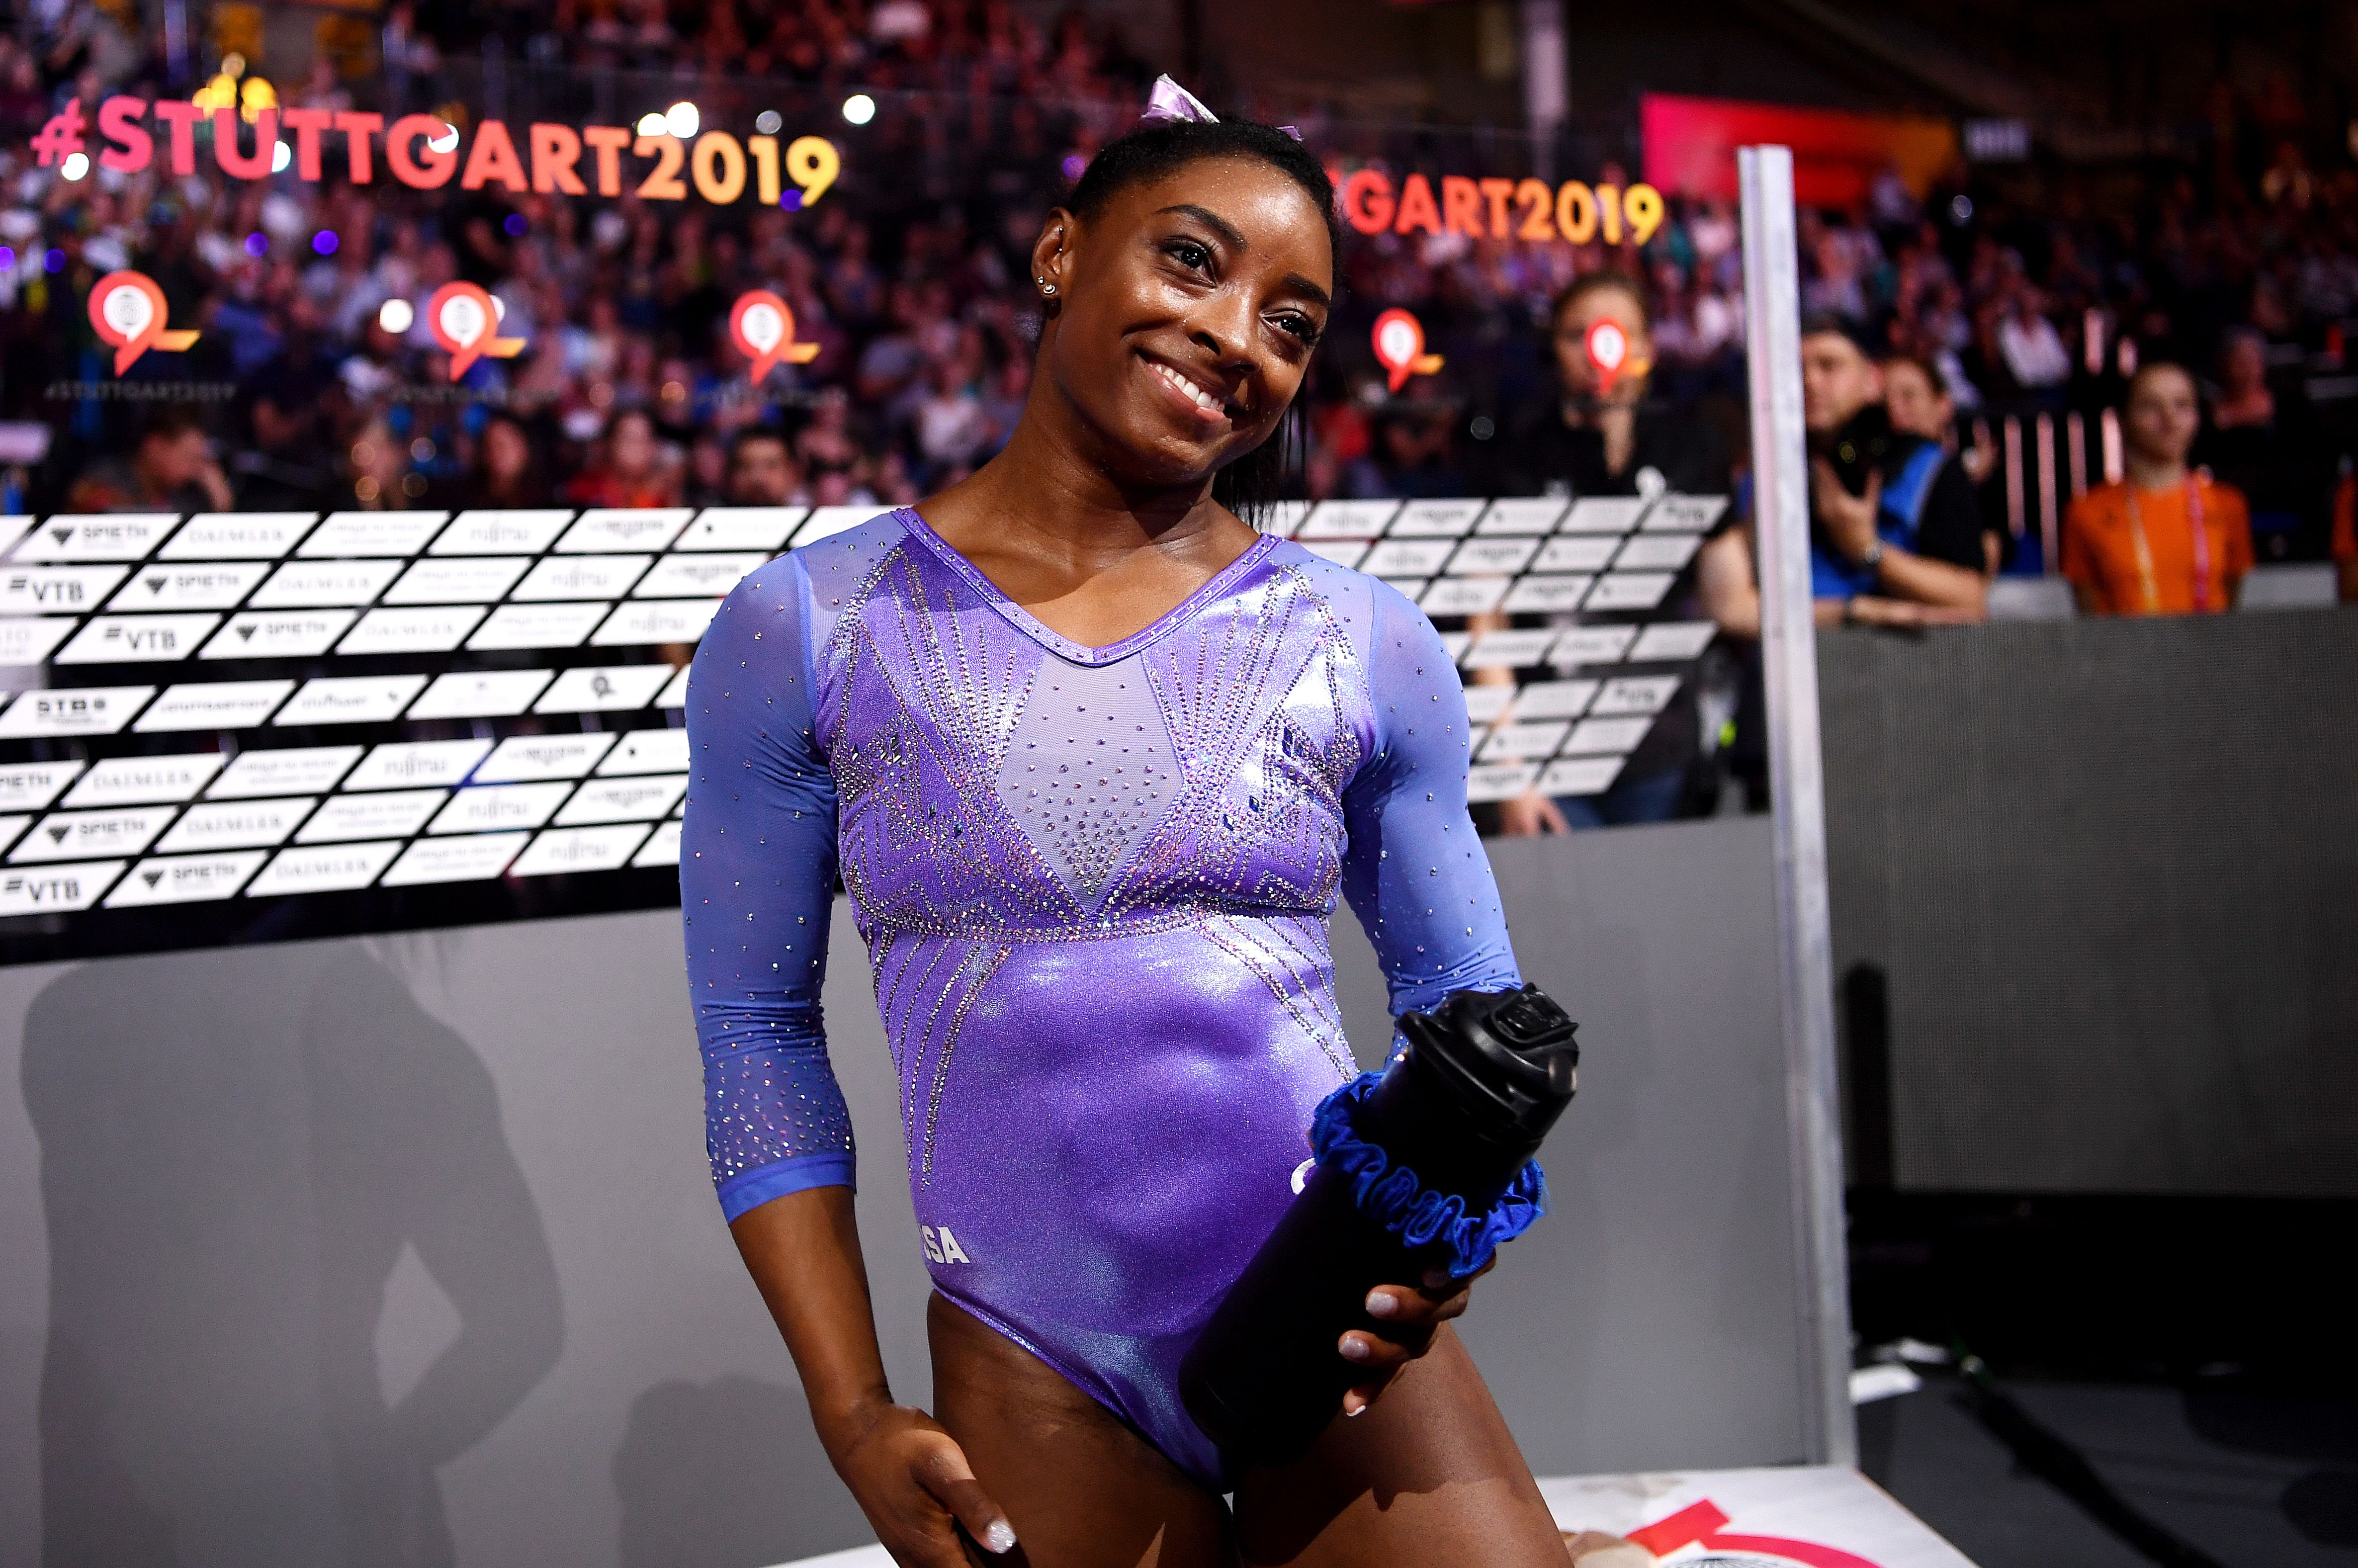 Simone Biles wins the gold medal in the Women's Floor Final during day 10 of the 49th FIG Artistic Gymnastics World Championships at Hanns-Martin-Schleyer-Halle on October 13, 2019 in Stuttgart, Germany. | Source: Getty Images